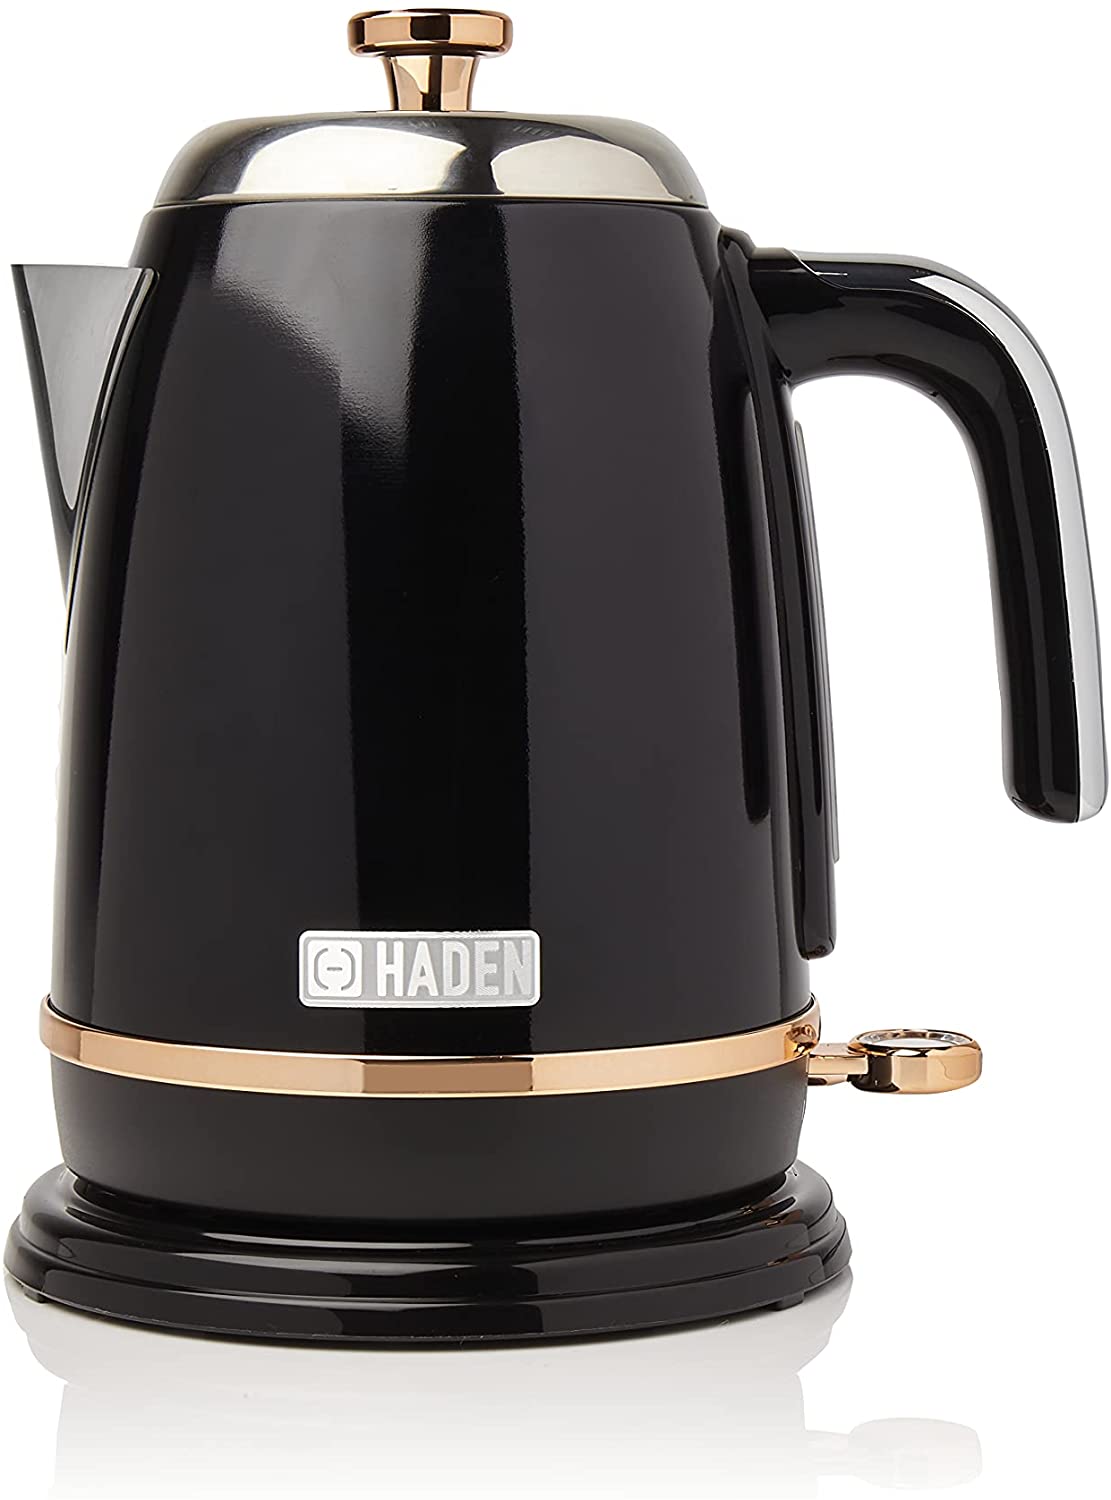 Haden Salcombe Black and Copper 1.7-Litre Kettle